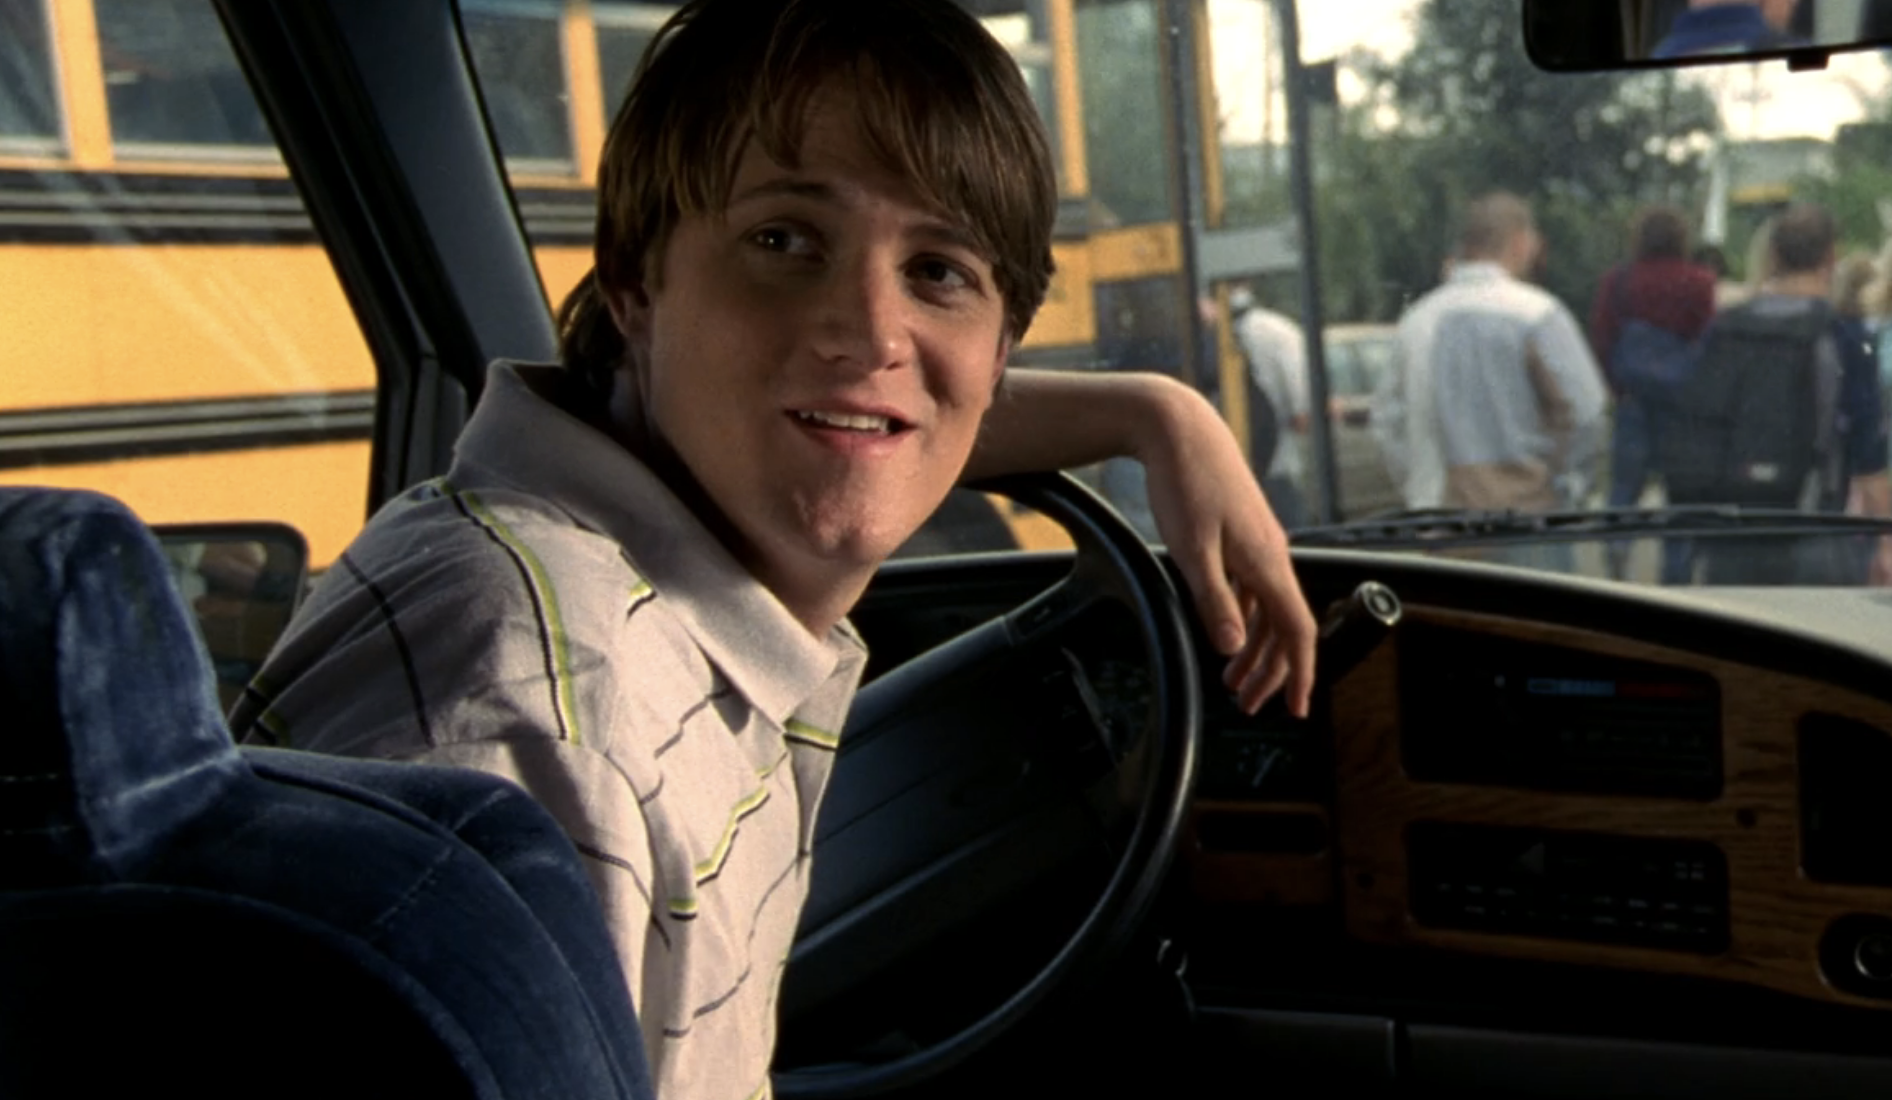 Screenshot from Veronica Mars S1E19. A young white man is in the driver's seat, his left arm resting on the steering wheel. He is turning toward the back of the van and has a smirk on his face.